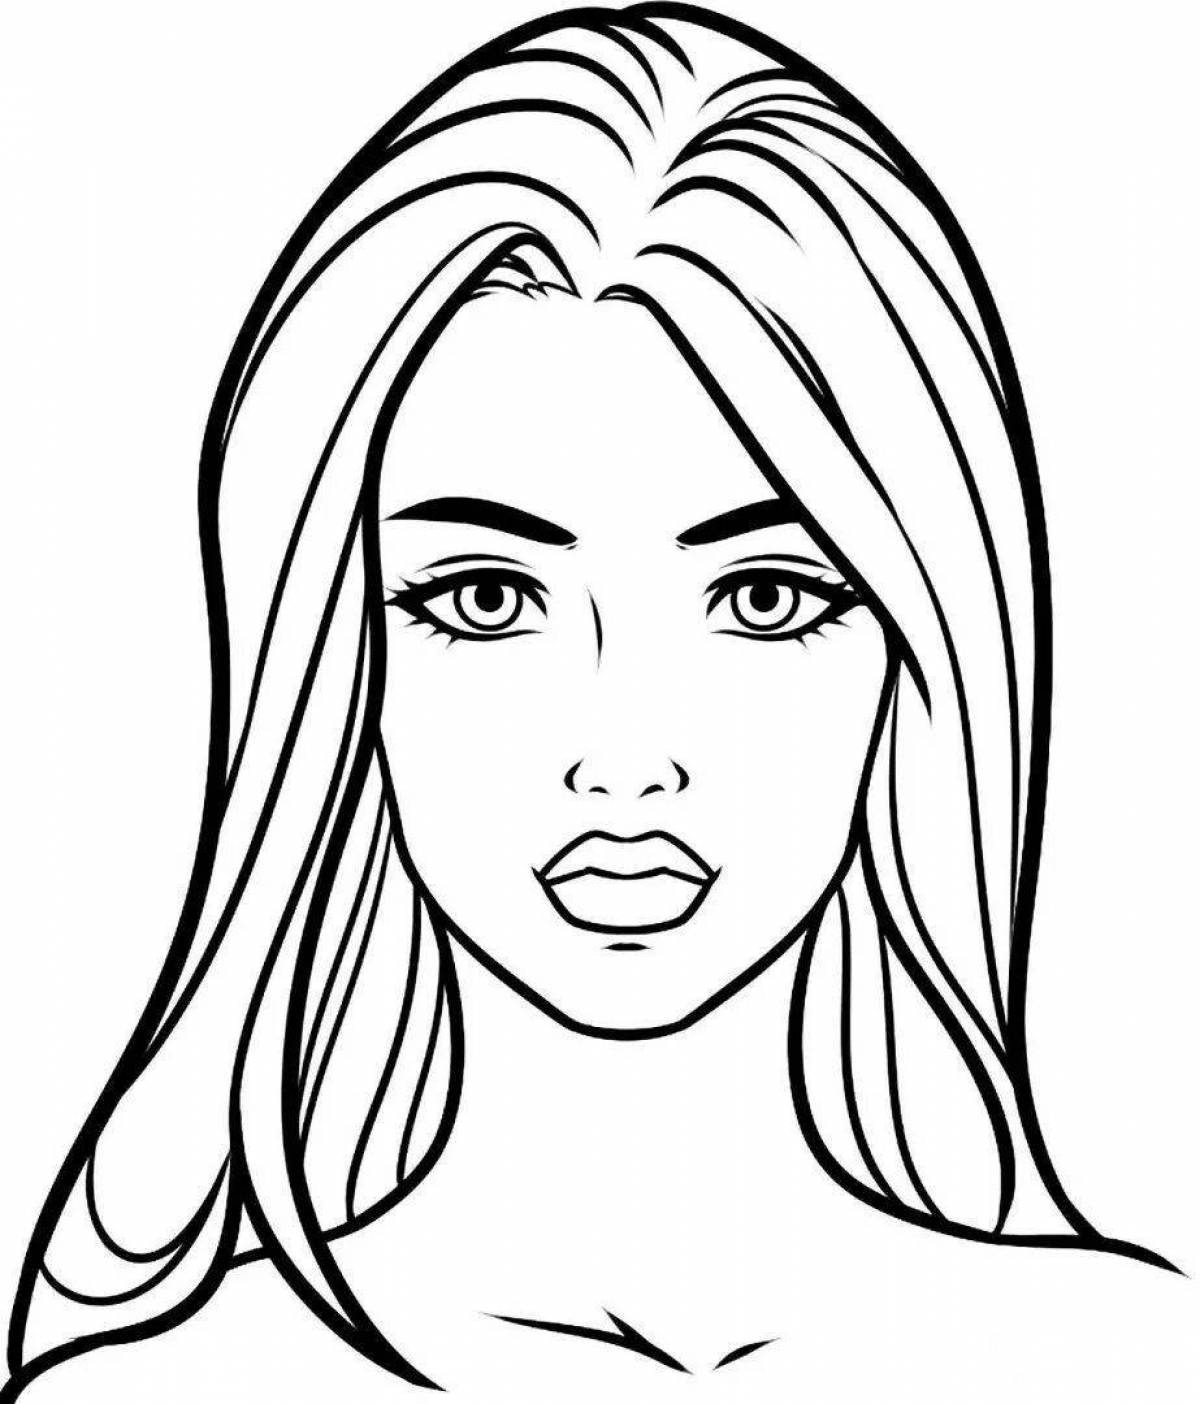 Engaging how to draw a person coloring